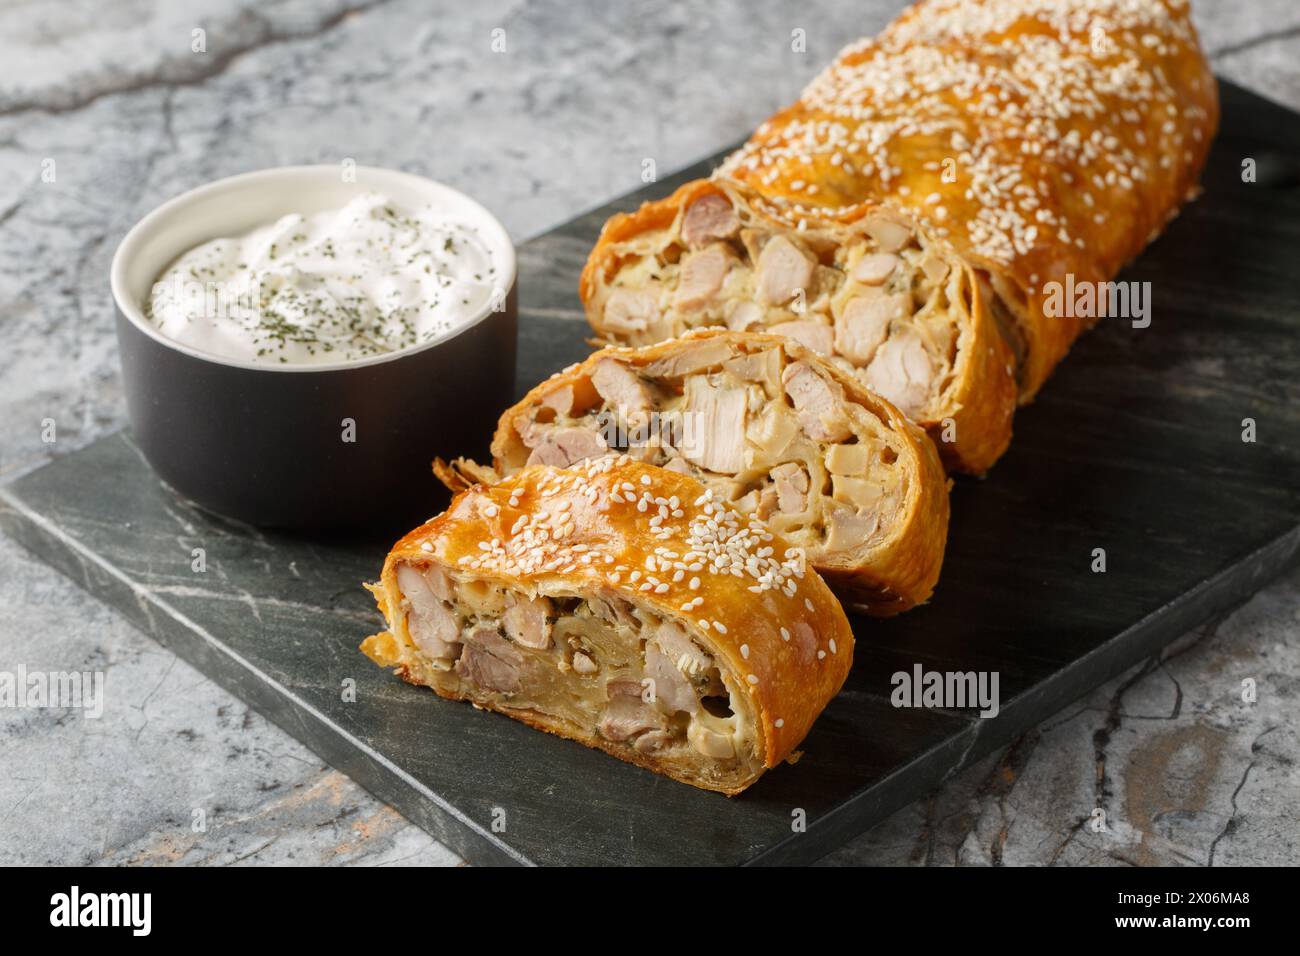 Strudel pie with chicken, mushrooms and cheese served with sauce close-up on a board on the table. Horizontal Stock Photo